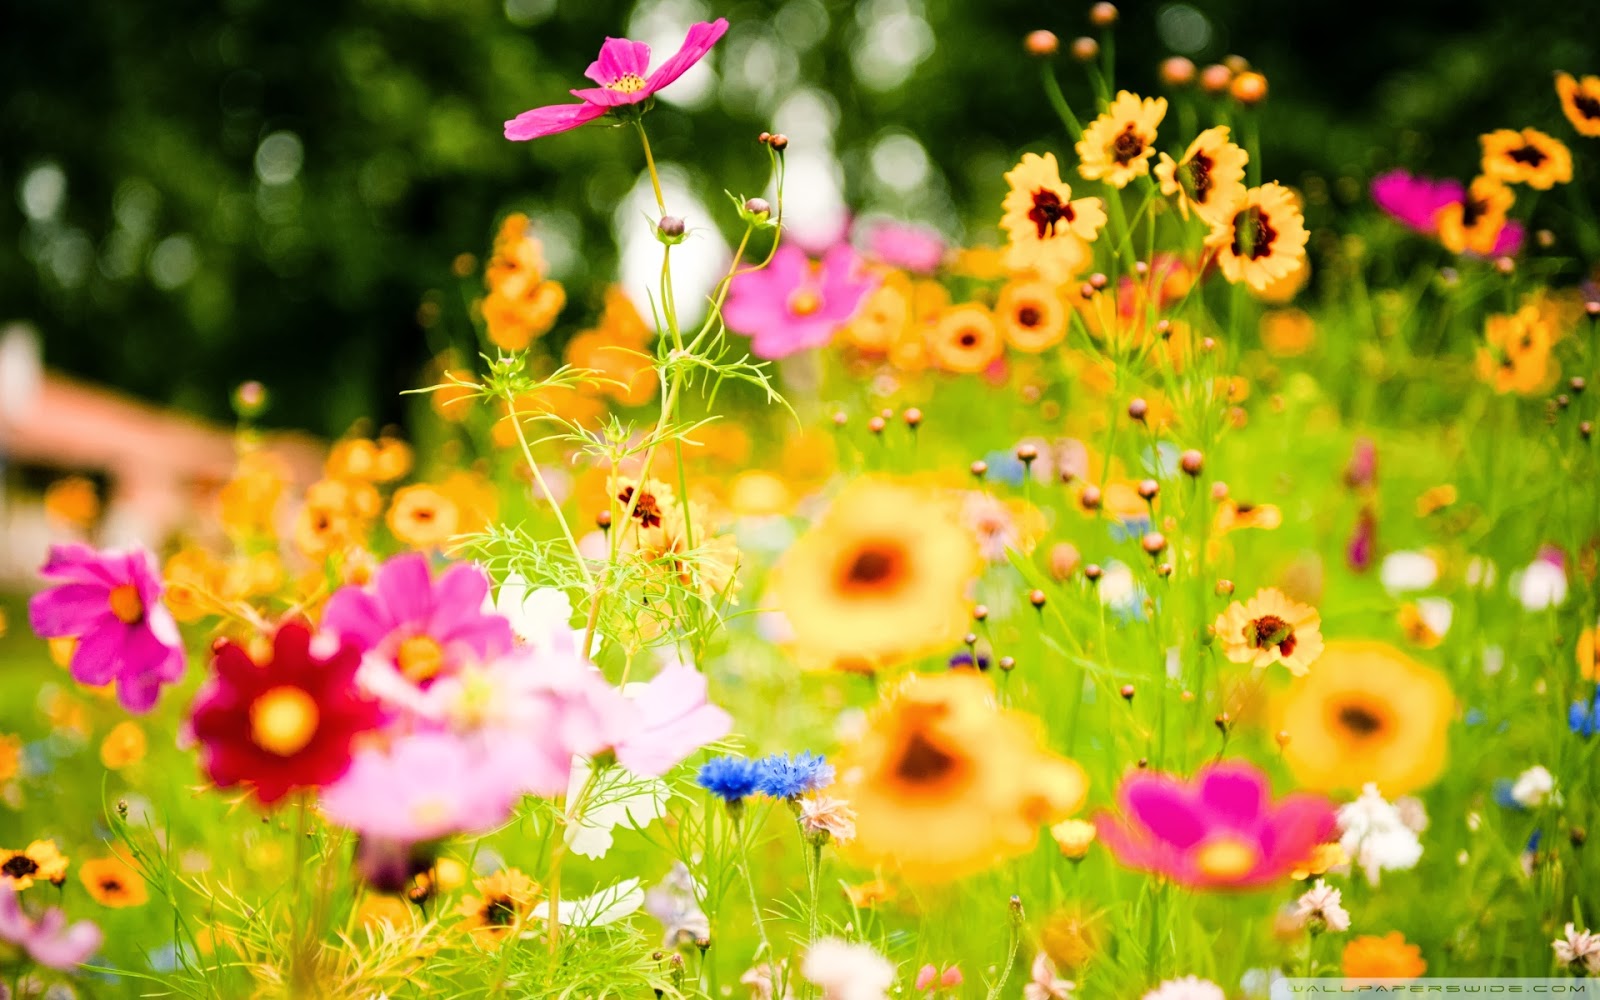 Wallpaper And Make This Summer Flowers For Your Desktop